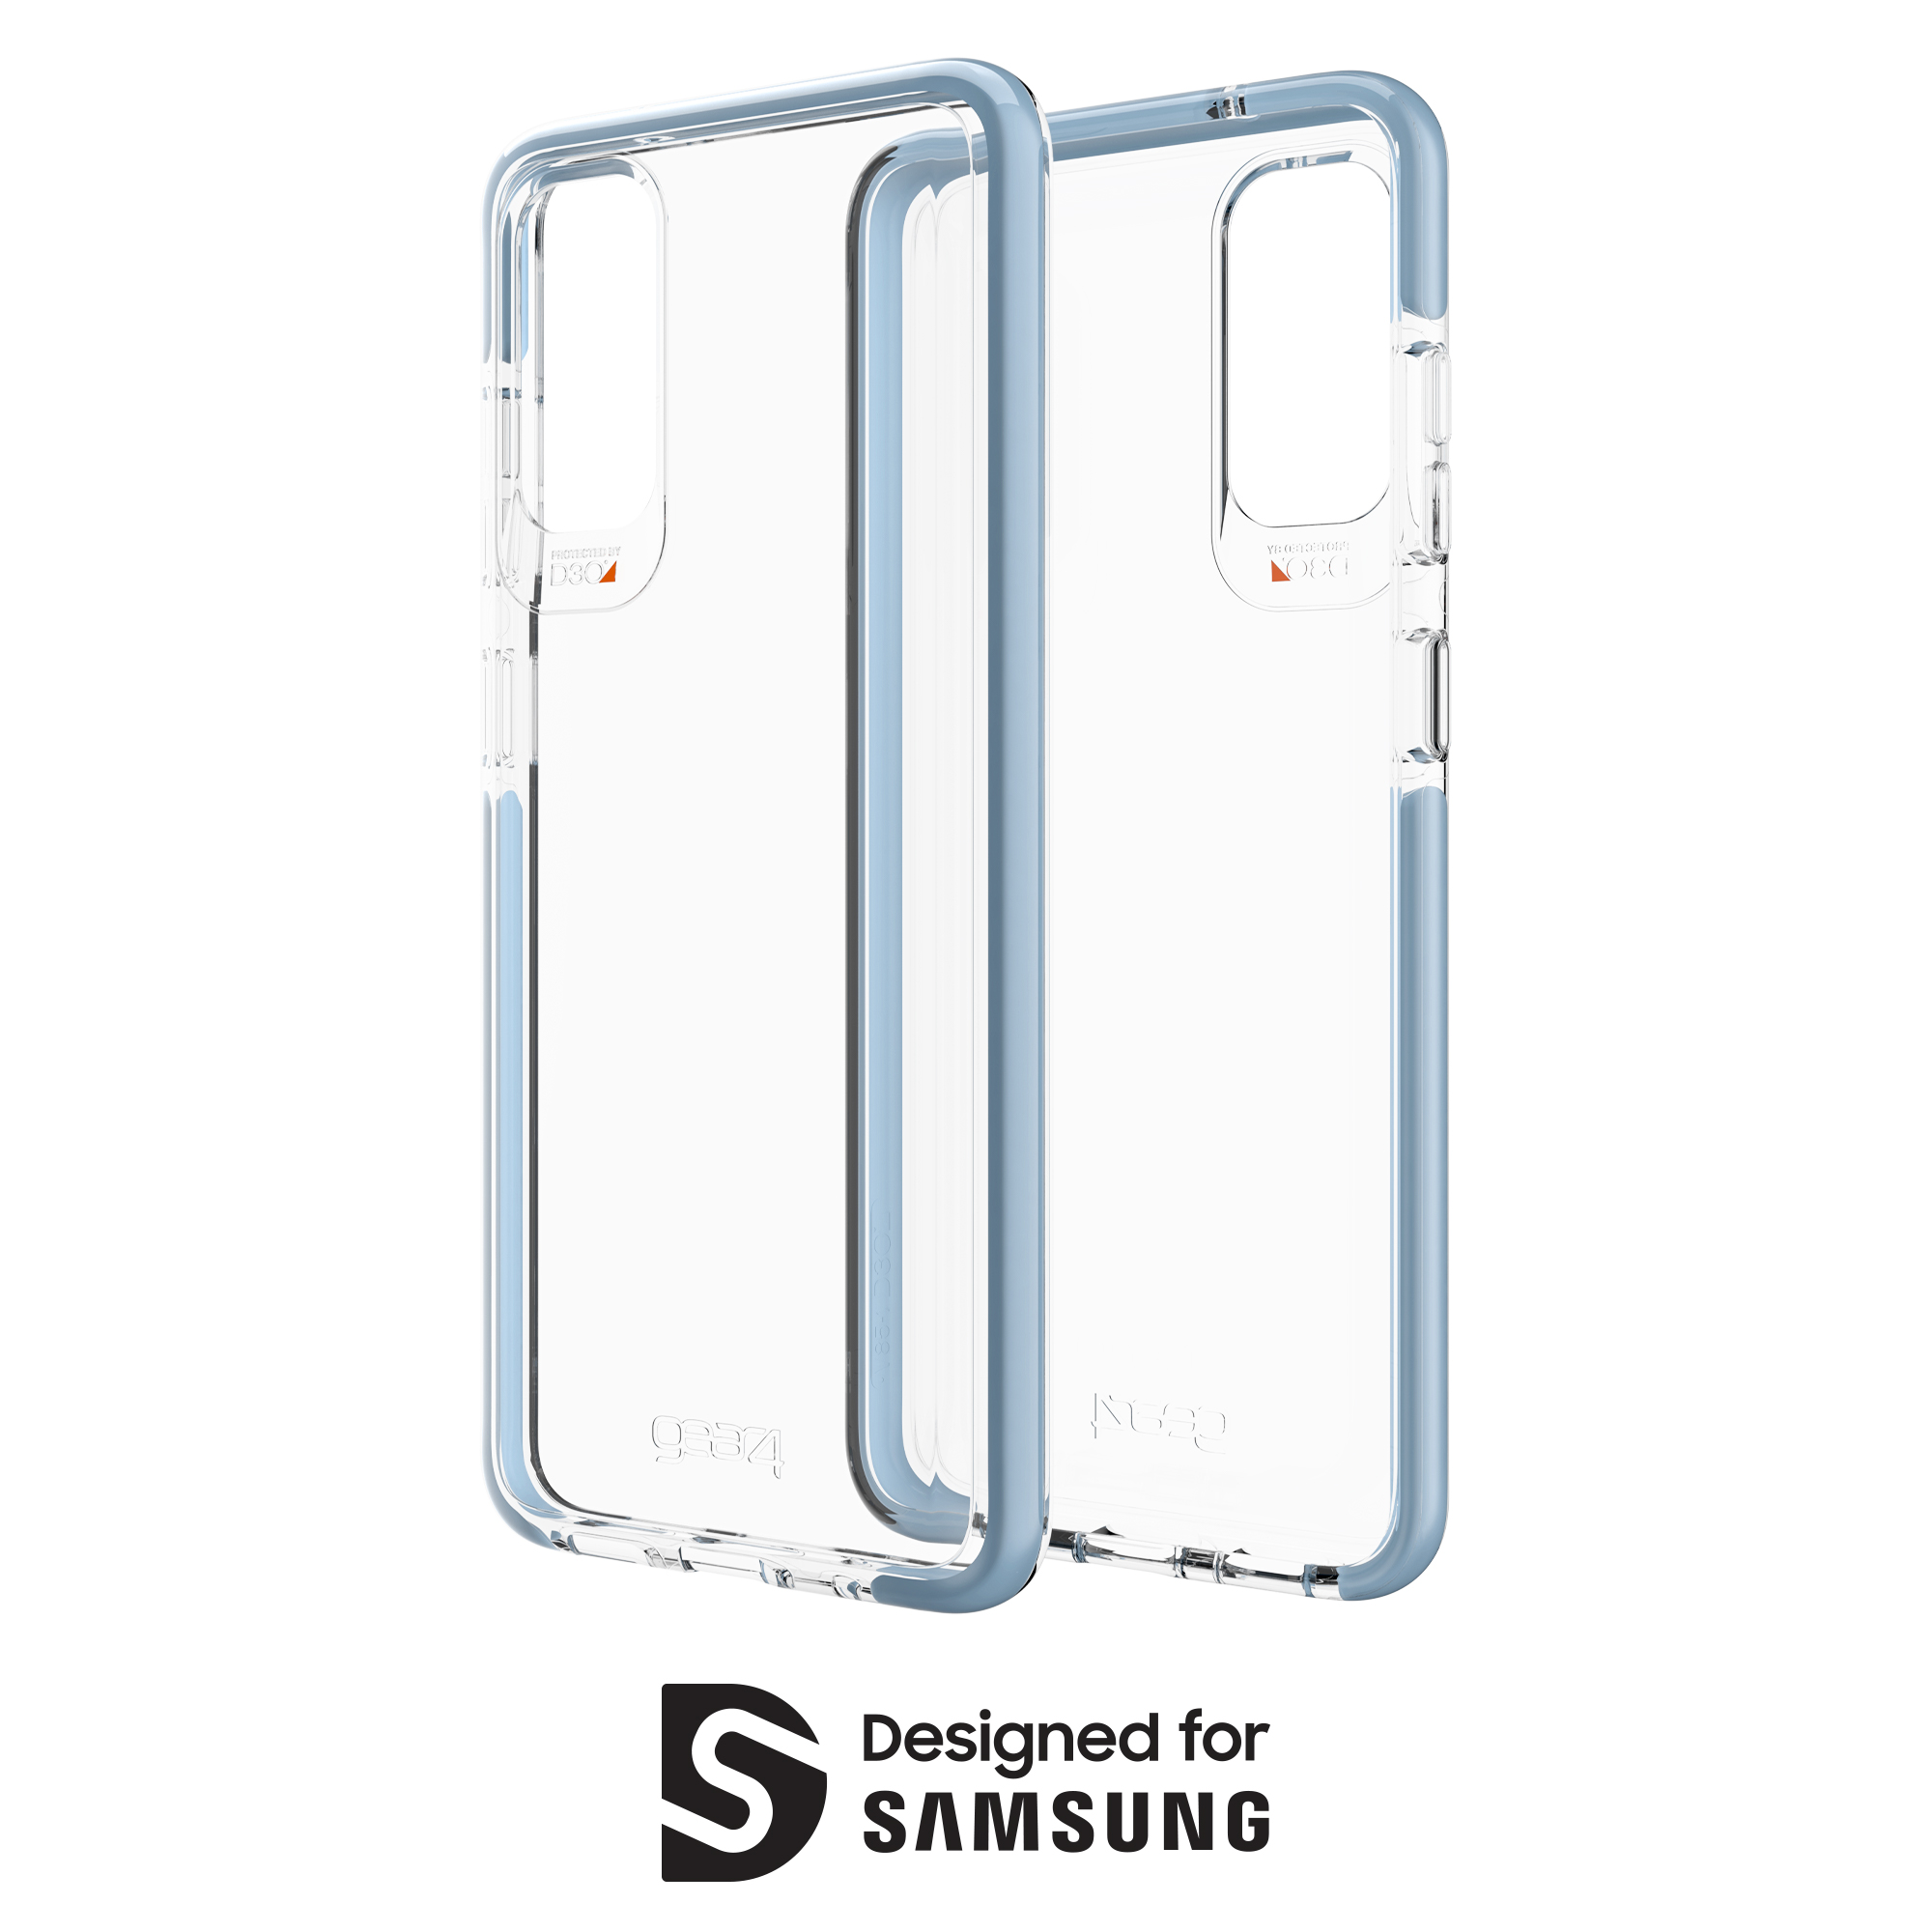 SAMSUNG, Backcover, GALAXY GEAR4 Piccadilly, S20, BLUE